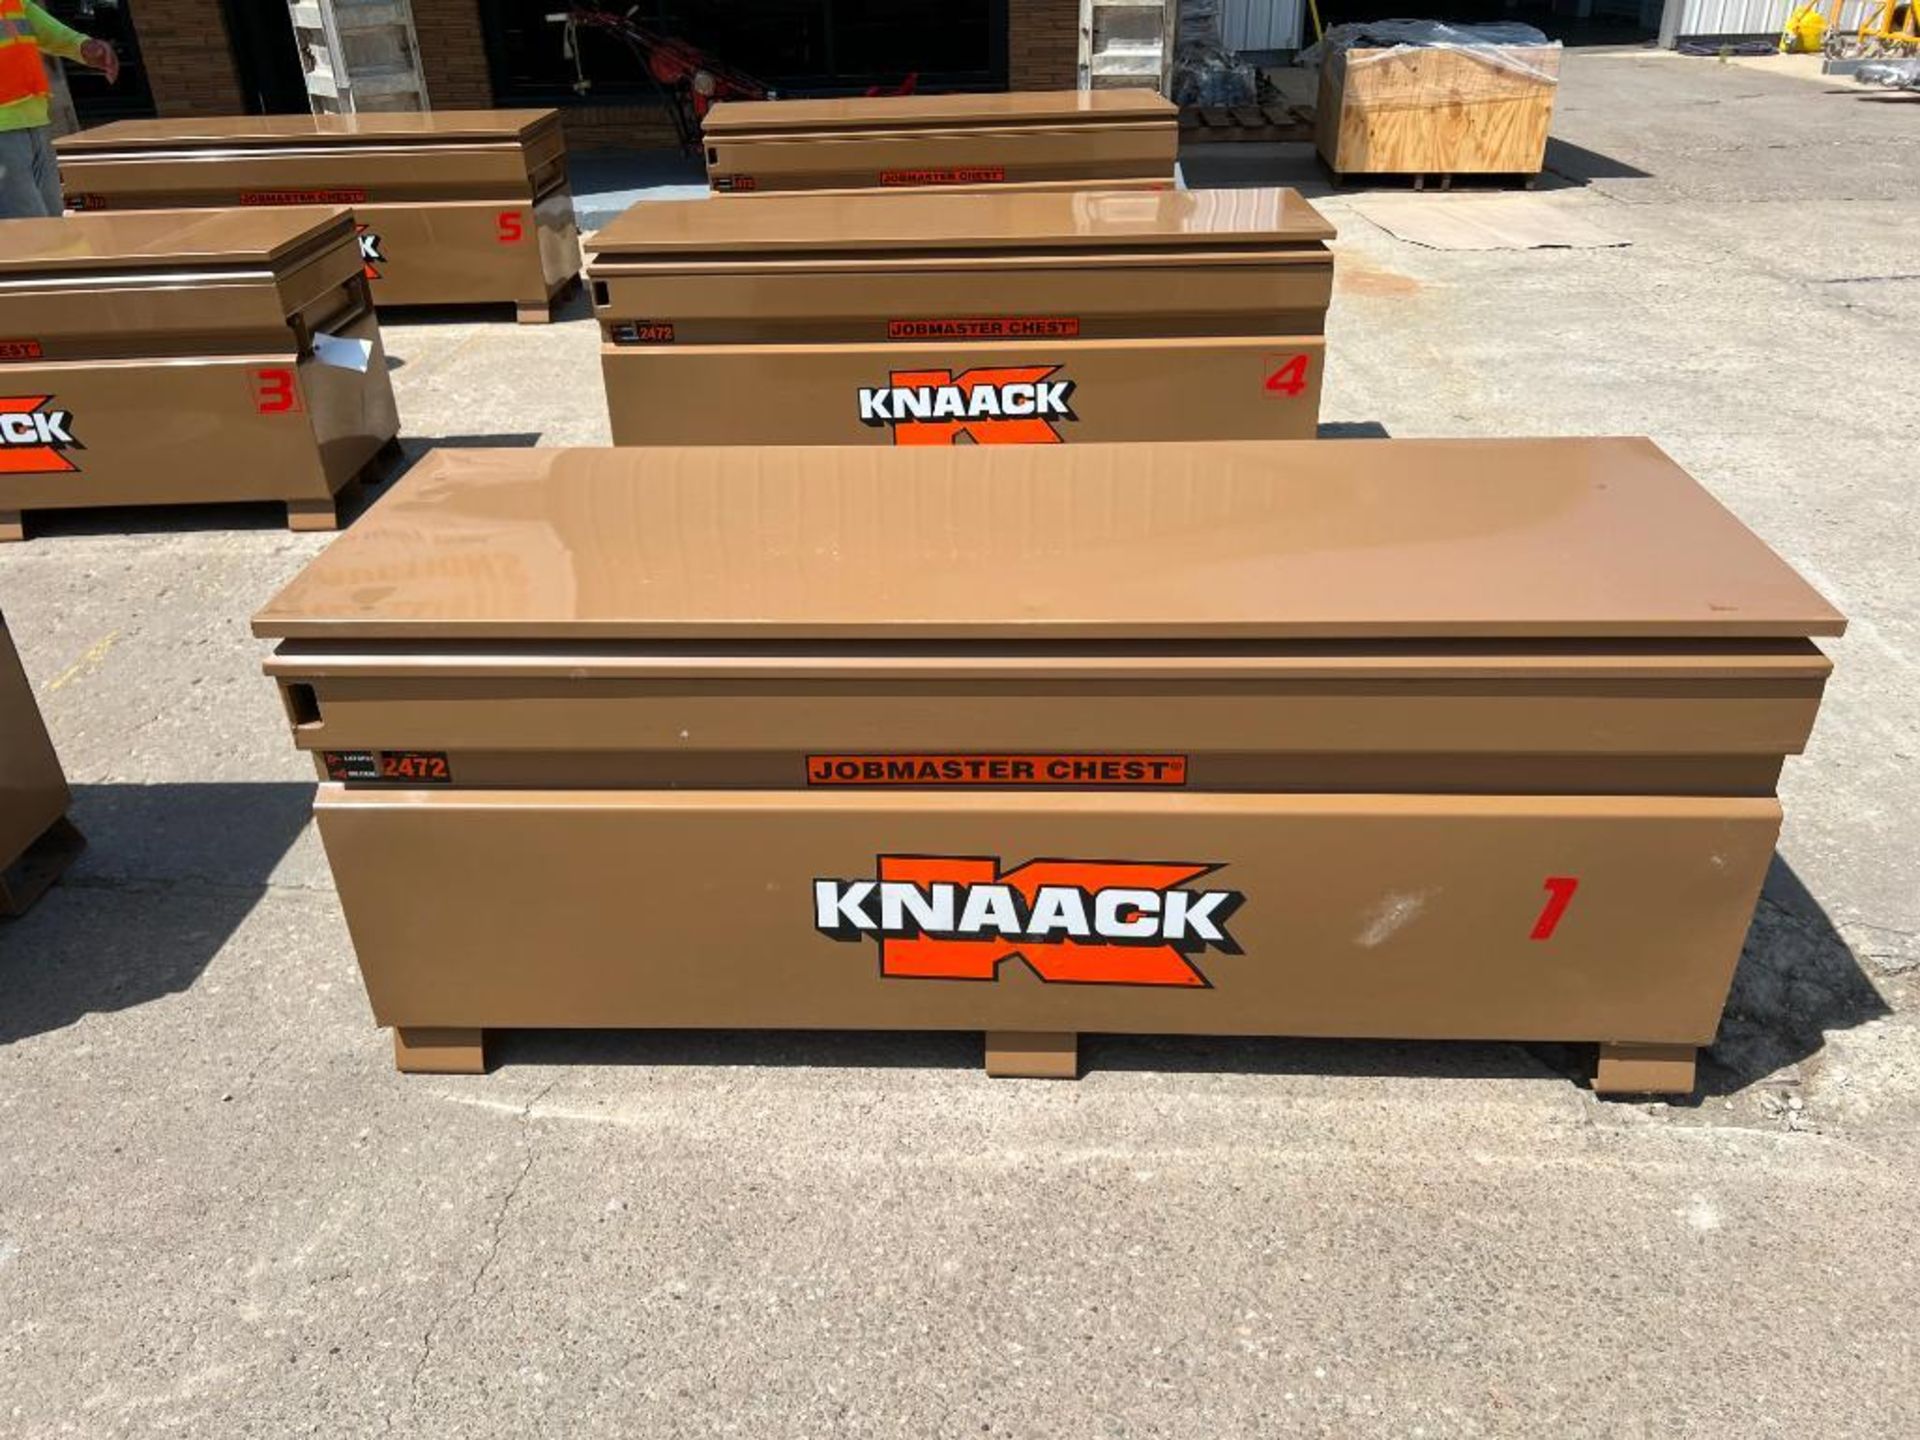 Knaack Jobmaster Chest, Model #2472, Serial #2211017524. Located in Mt. Pleasant, IA